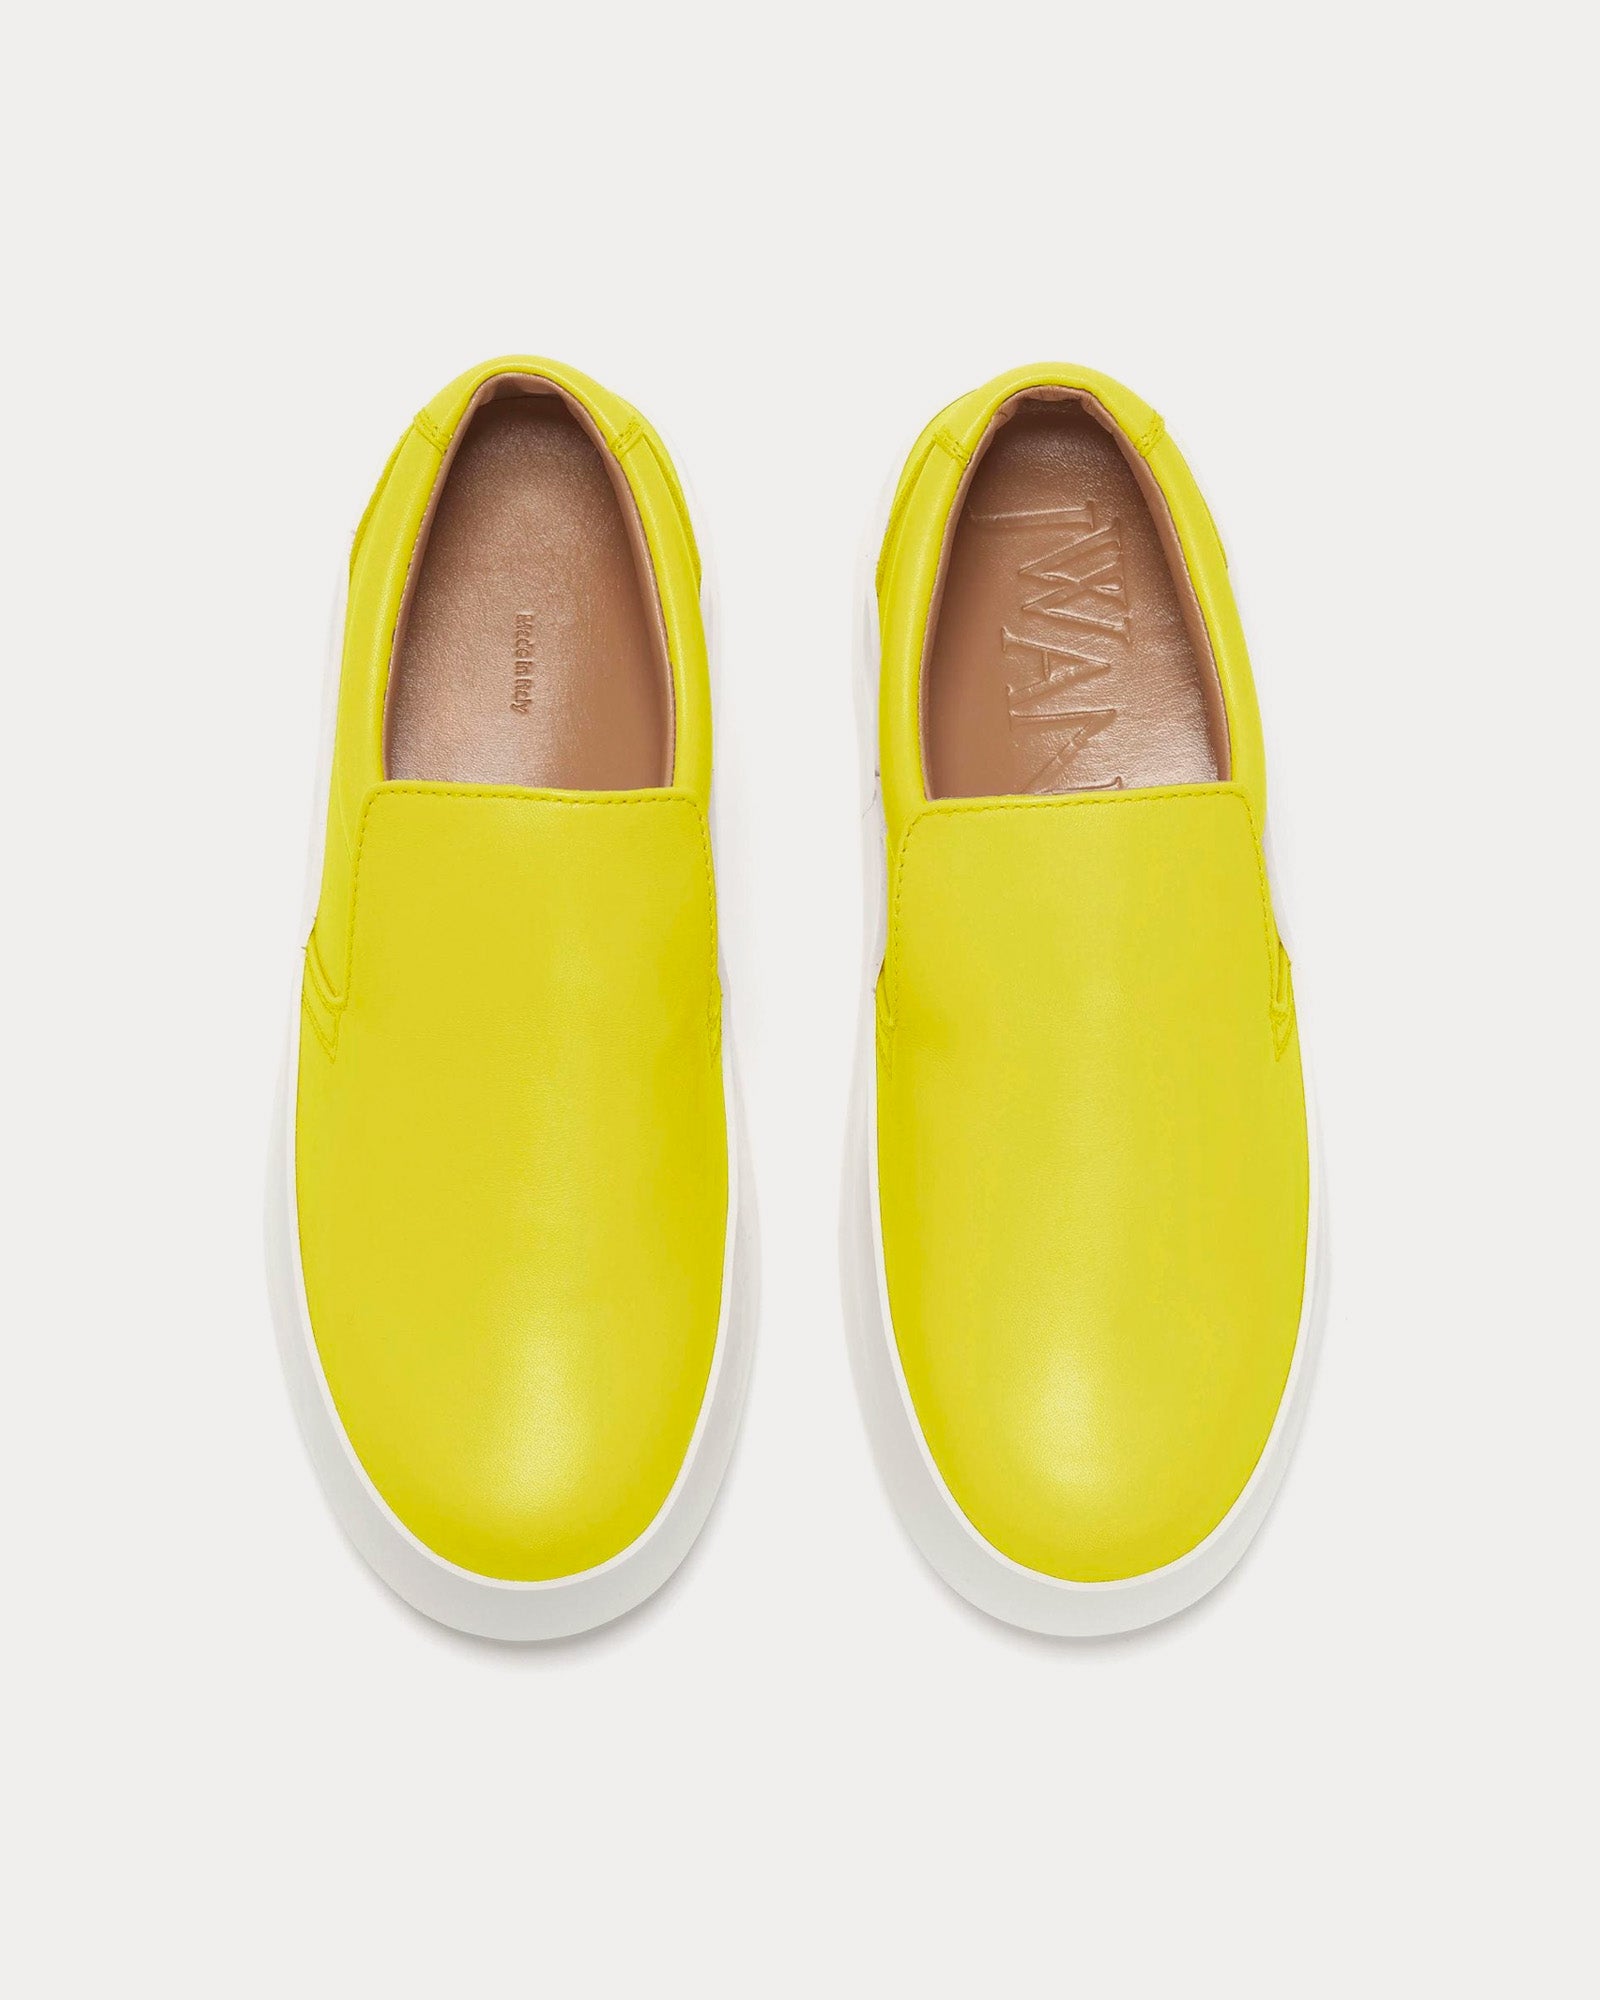 JW Anderson - Smooth Leather Fluro Yellow Slip On Sneakers